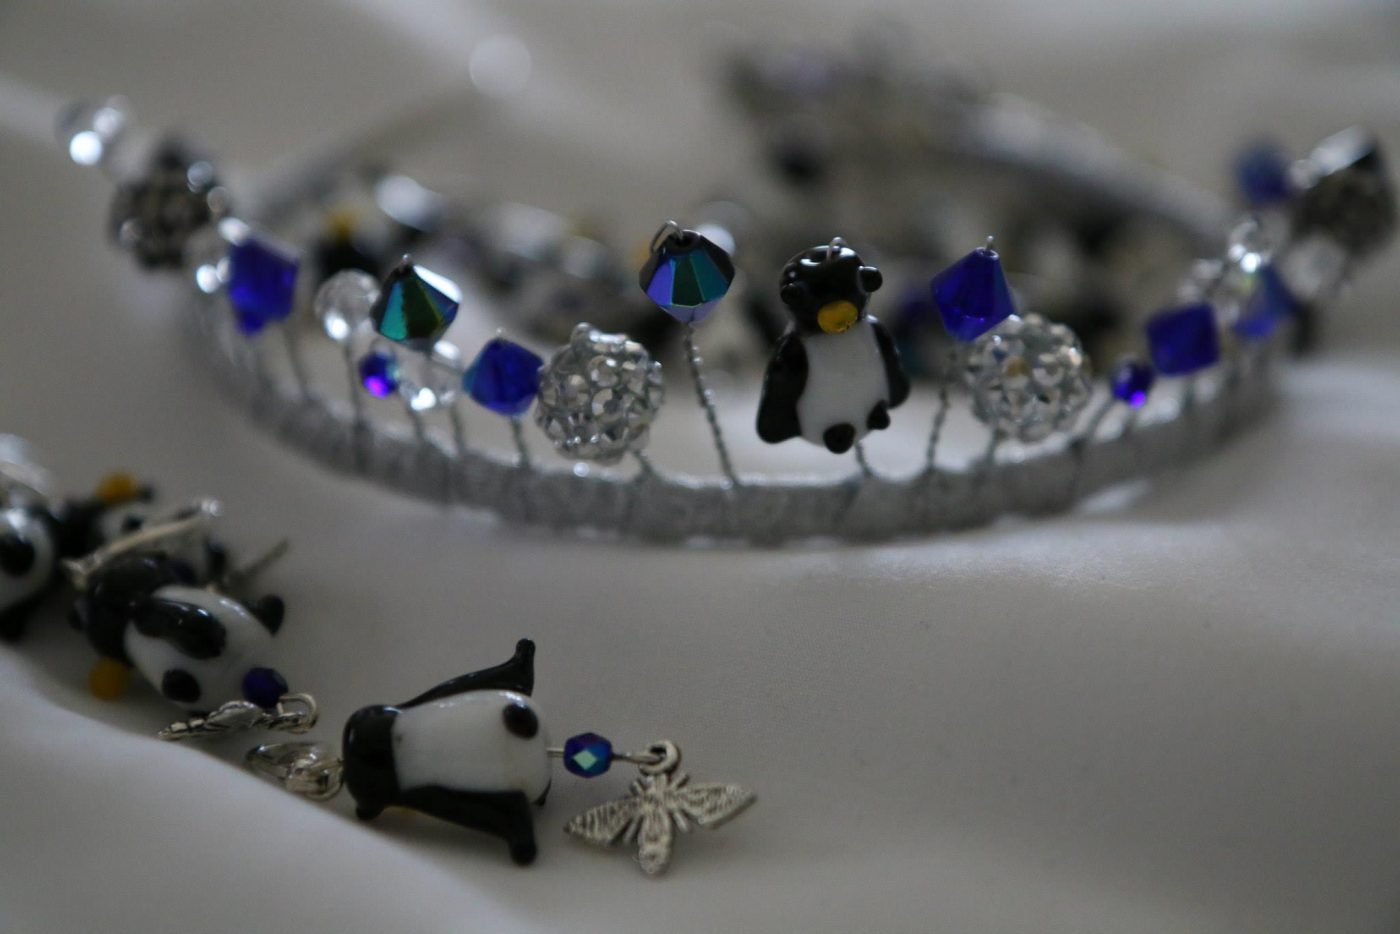 A closeup of a tiara with blue beads and penguin charms